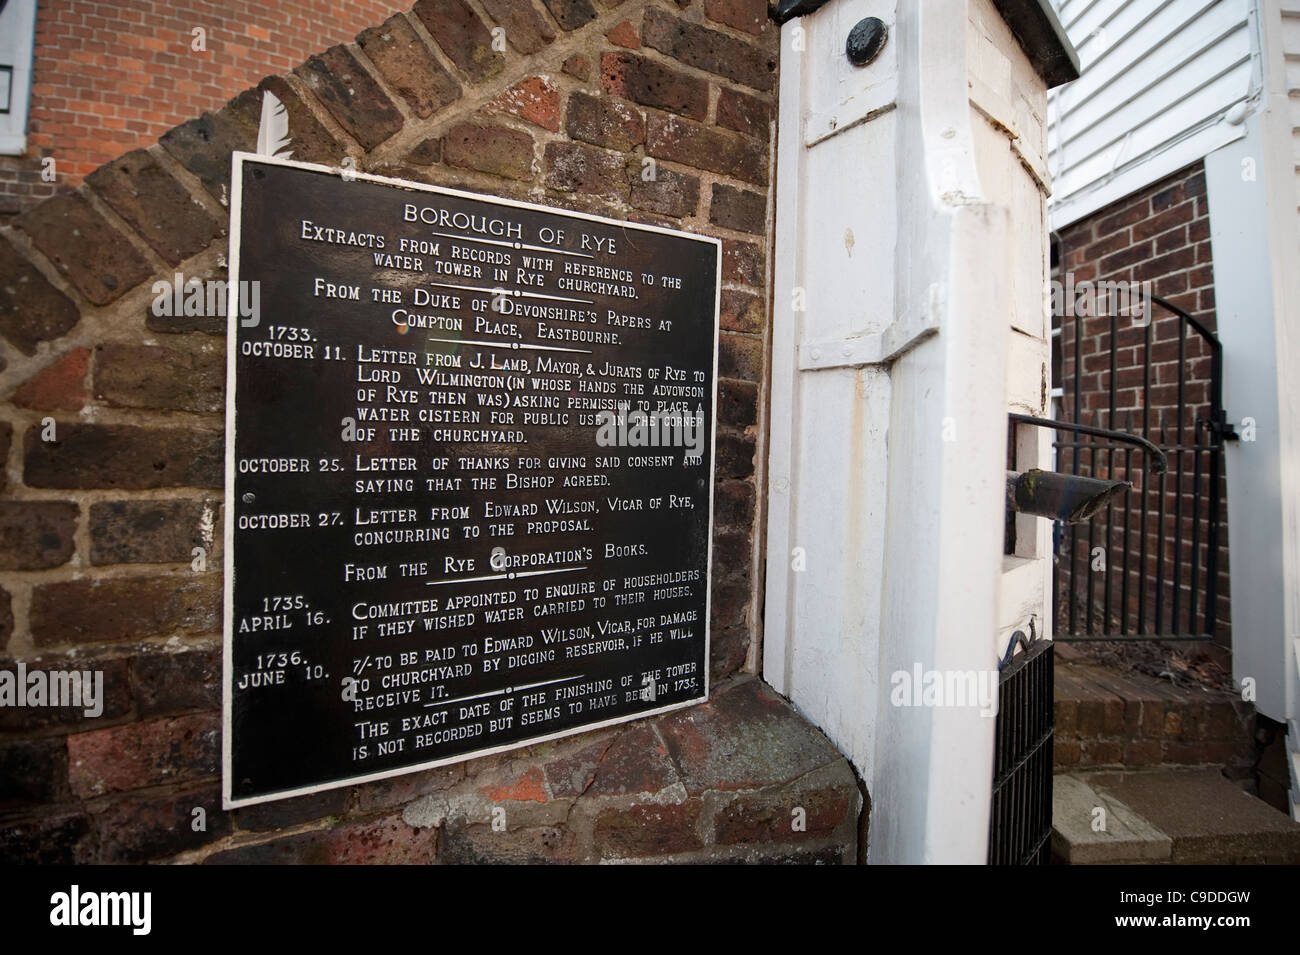 Water tower plaque with 18th century records at Rye Churchyard, East Sussex, England Stock Photo